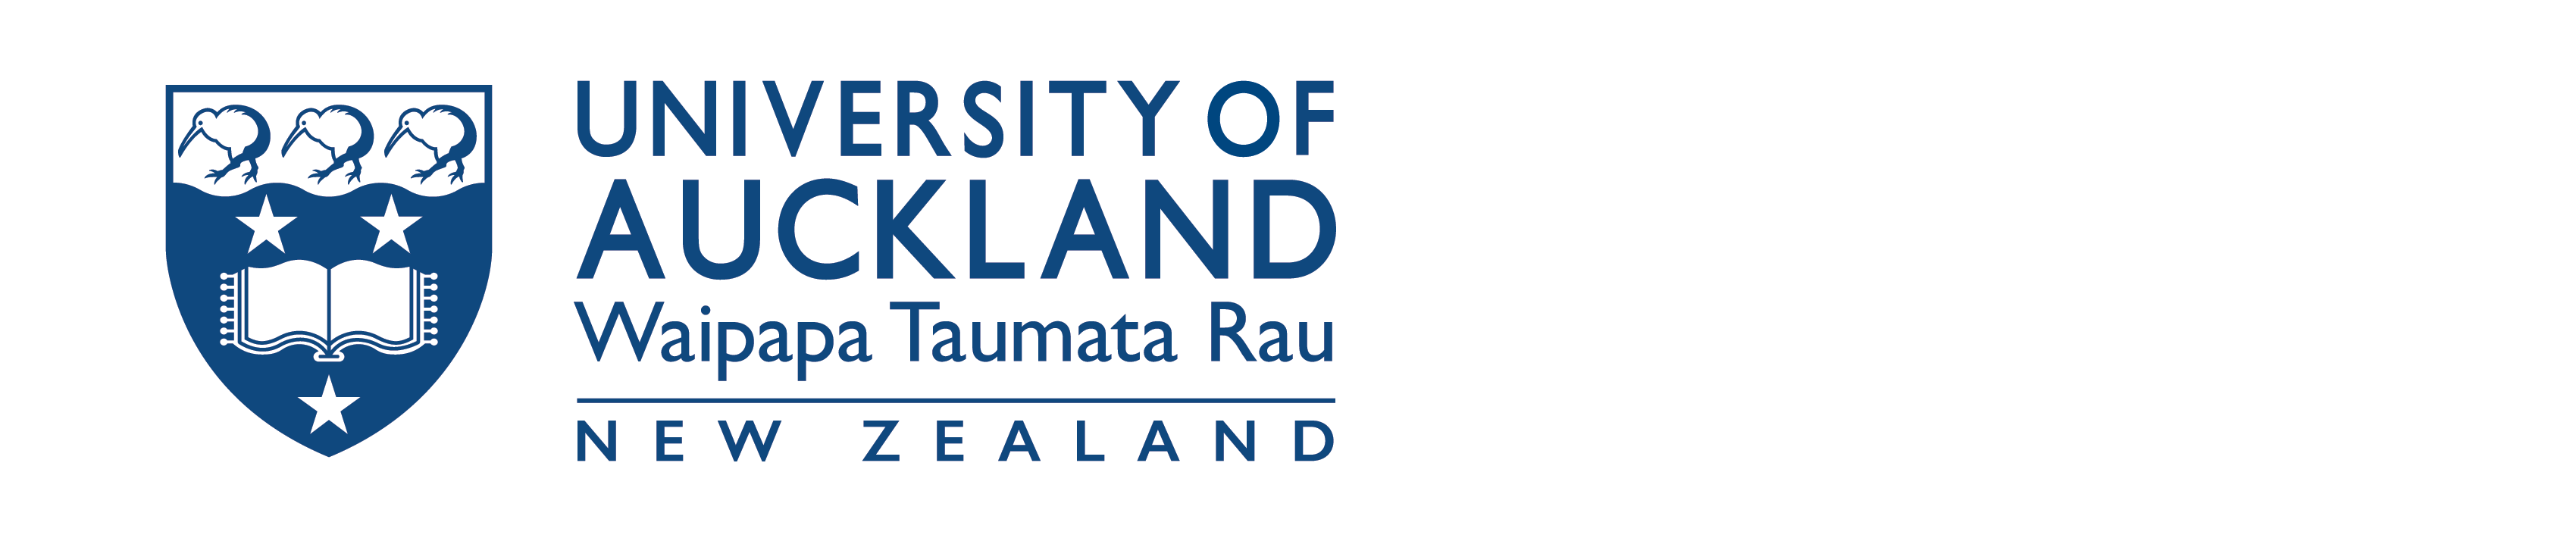 Auckland Faculty of Science